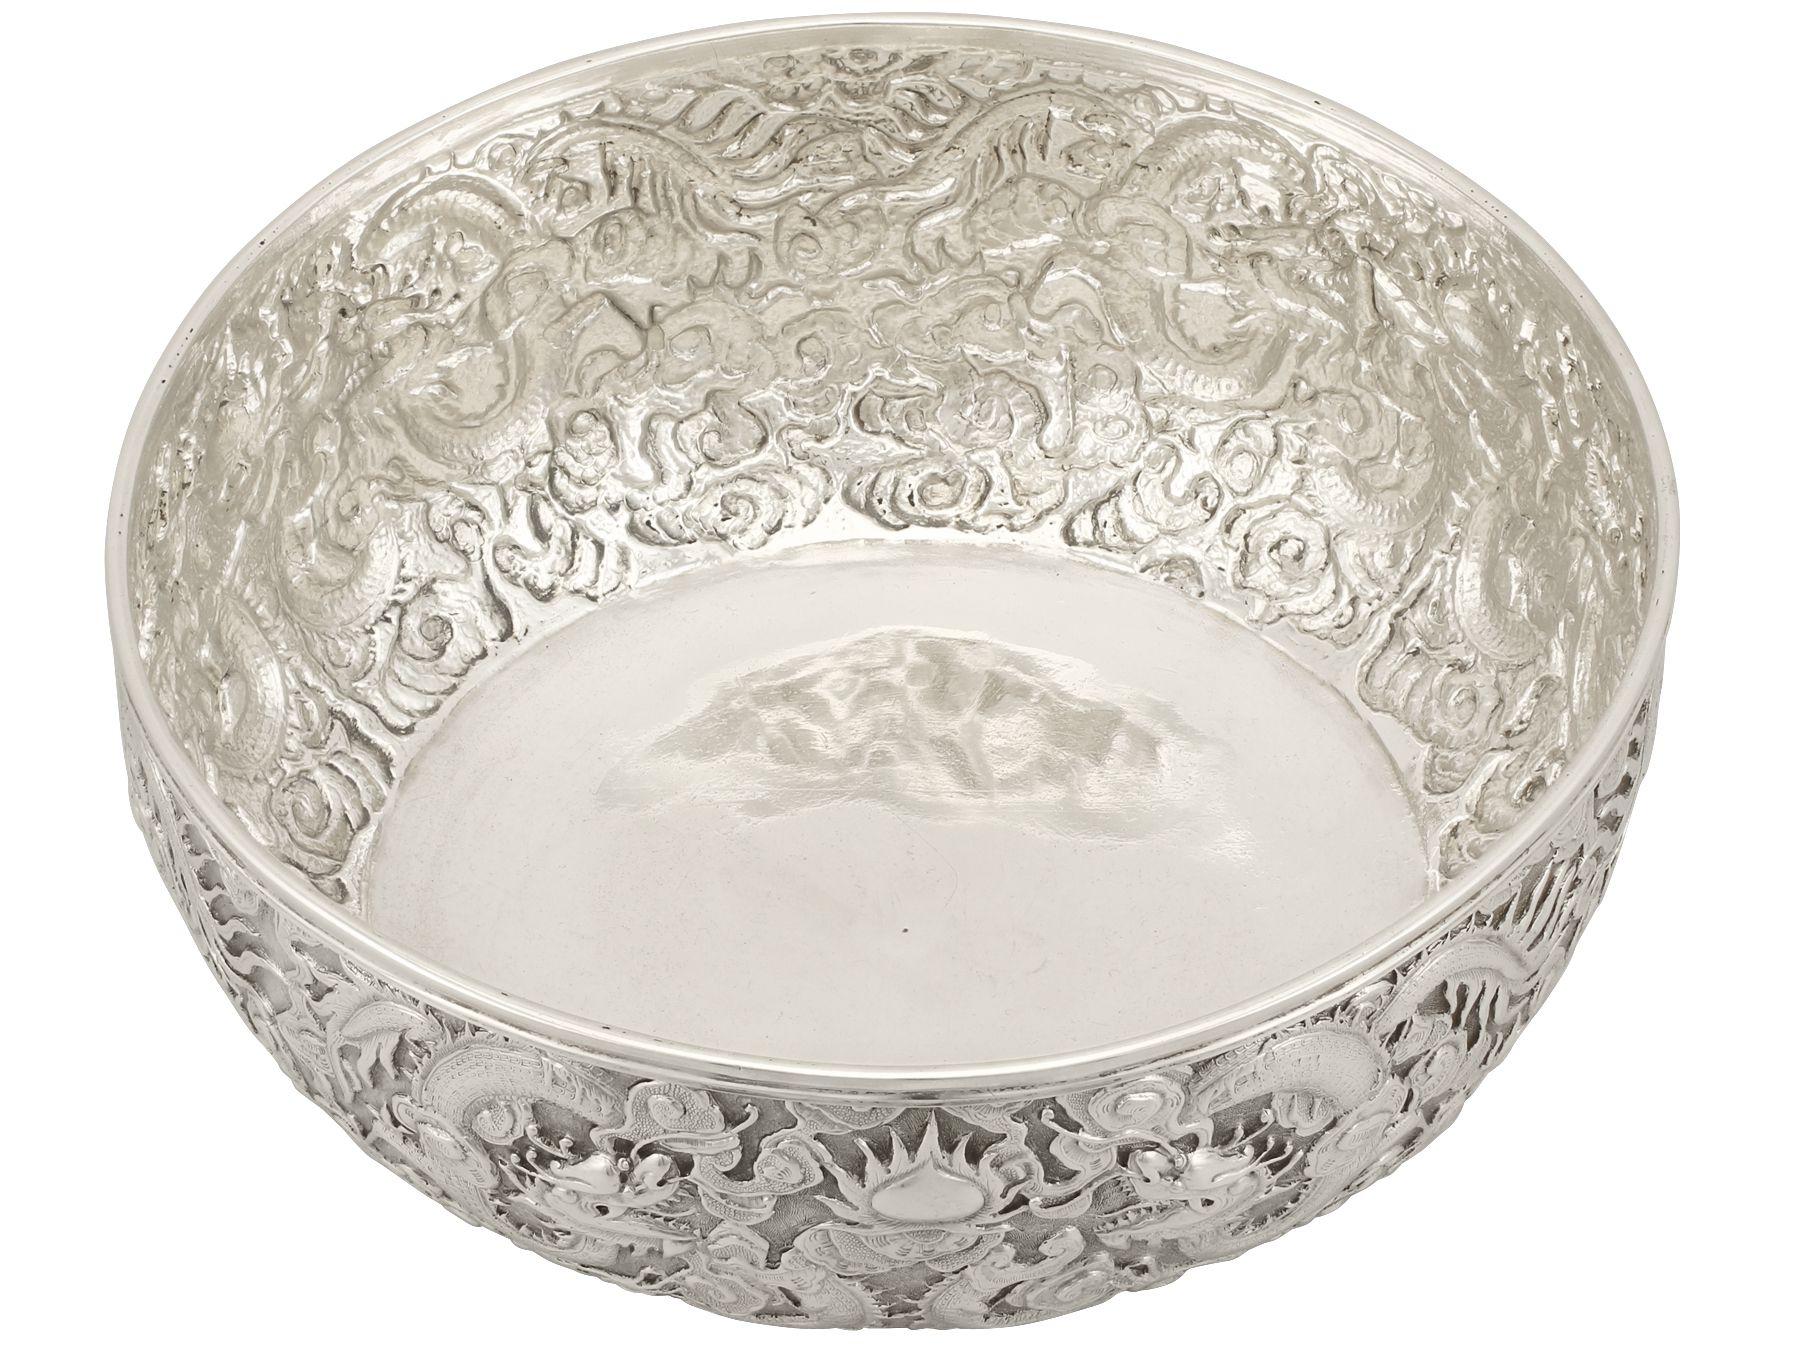 Early 20th Century 20th Century Chinese Export Silver Bowl Antique Circa 1900